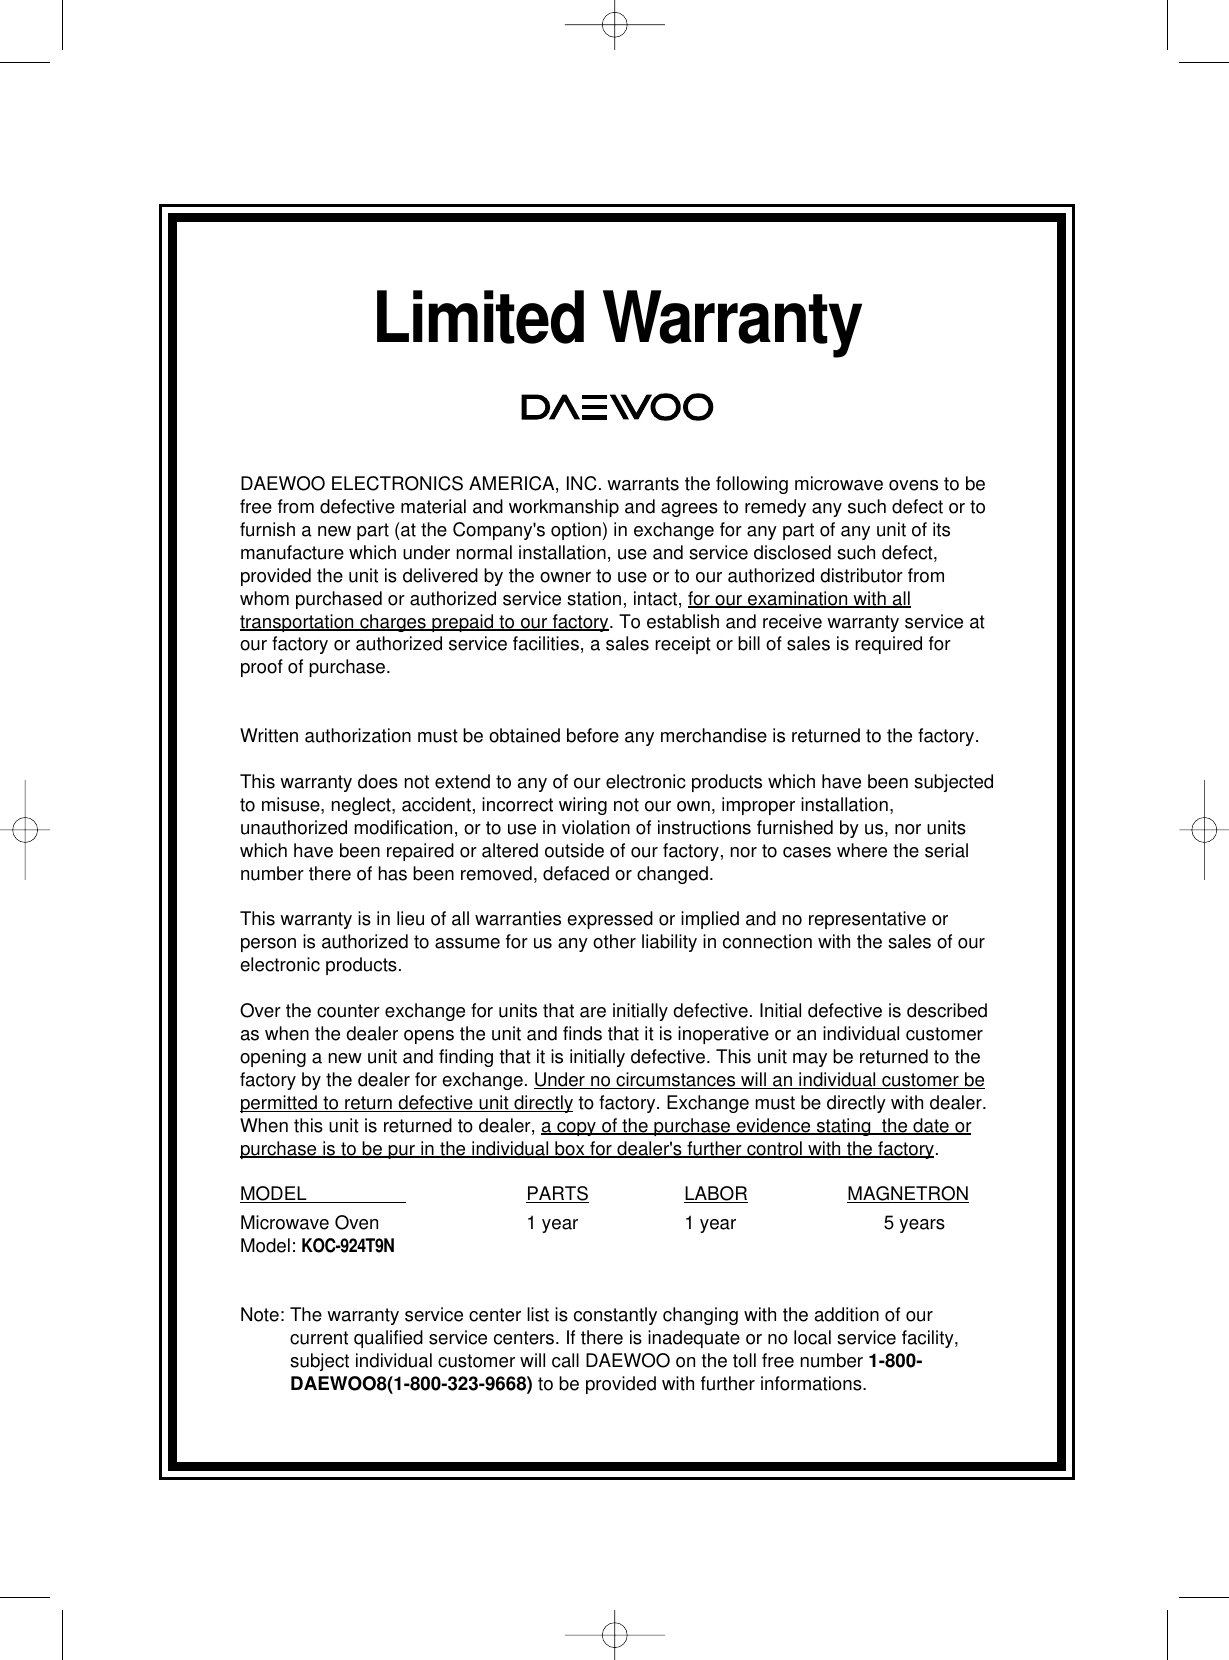 Limited WarrantyDAEWOO ELECTRONICS AMERICA, INC. warrants the following microwave ovens to befree from defective material and workmanship and agrees to remedy any such defect or tofurnish a new part (at the Company&apos;s option) in exchange for any part of any unit of itsmanufacture which under normal installation, use and service disclosed such defect,provided the unit is delivered by the owner to use or to our authorized distributor fromwhom purchased or authorized service station, intact, for our examination with alltransportation charges prepaid to our factory. To establish and receive warranty service atour factory or authorized service facilities, a sales receipt or bill of sales is required forproof of purchase.Written authorization must be obtained before any merchandise is returned to the factory.This warranty does not extend to any of our electronic products which have been subjectedto misuse, neglect, accident, incorrect wiring not our own, improper installation,unauthorized modification, or to use in violation of instructions furnished by us, nor unitswhich have been repaired or altered outside of our factory, nor to cases where the serialnumber there of has been removed, defaced or changed.This warranty is in lieu of all warranties expressed or implied and no representative orperson is authorized to assume for us any other liability in connection with the sales of ourelectronic products.Over the counter exchange for units that are initially defective. Initial defective is describedas when the dealer opens the unit and finds that it is inoperative or an individual customeropening a new unit and finding that it is initially defective. This unit may be returned to thefactory by the dealer for exchange. Under no circumstances will an individual customer bepermitted to return defective unit directly to factory. Exchange must be directly with dealer.When this unit is returned to dealer, a copy of the purchase evidence stating  the date orpurchase is to be pur in the individual box for dealer&apos;s further control with the factory.MODEL                    PARTS LABOR MAGNETRONMicrowave Oven 1 year 1 year 5 yearsModel: KOC-924T9NNote: The warranty service center list is constantly changing with the addition of ourcurrent qualified service centers. If there is inadequate or no local service facility,subject individual customer will call DAEWOO on the toll free number 1-800-DAEWOO8(1-800-323-9668) to be provided with further informations.